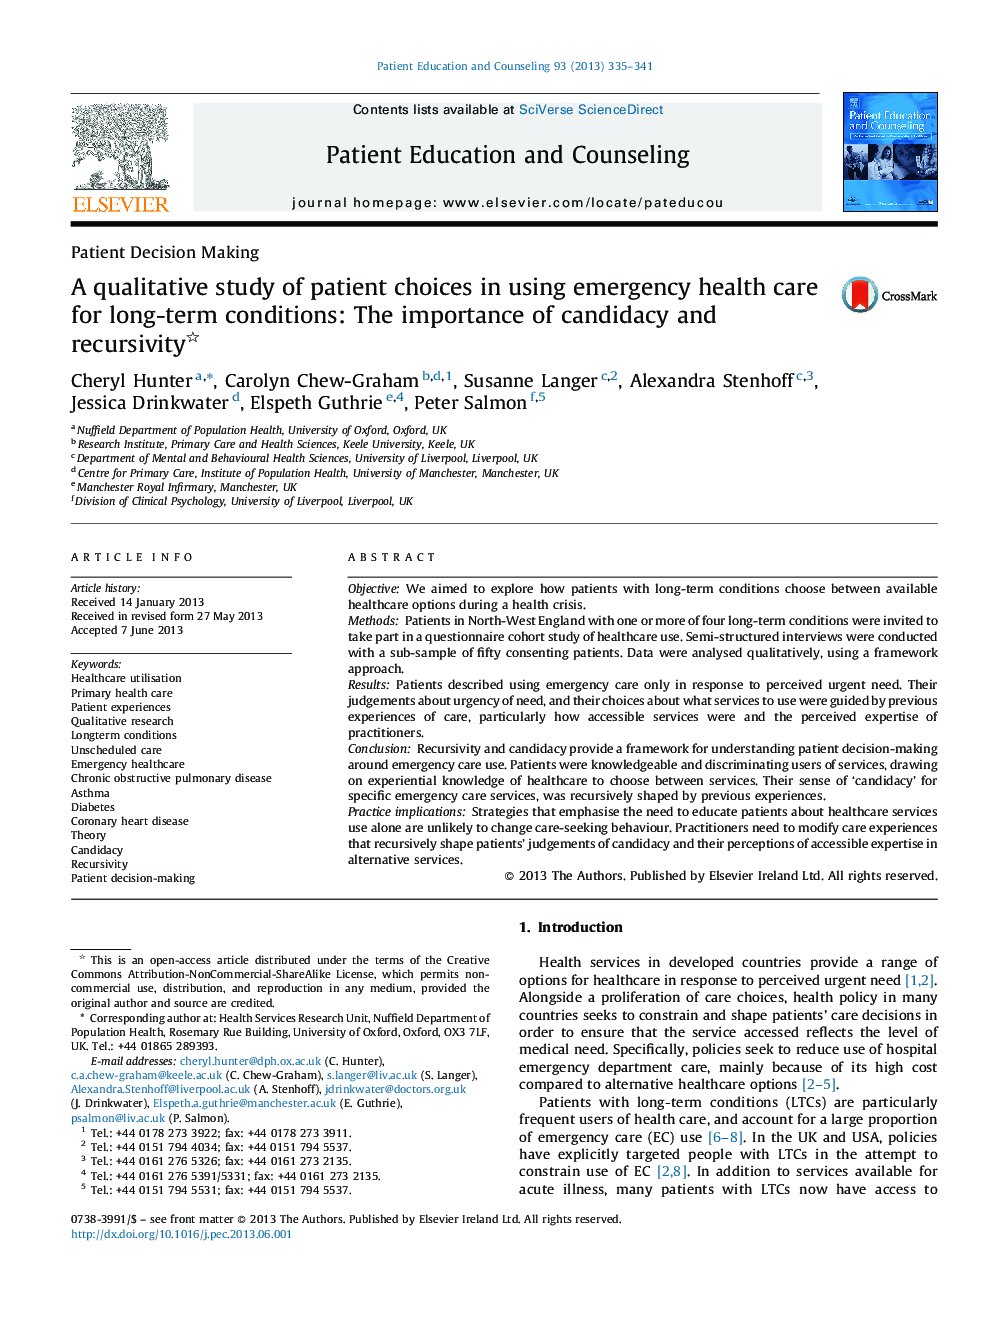 A qualitative study of patient choices in using emergency health care for long-term conditions: The importance of candidacy and recursivity